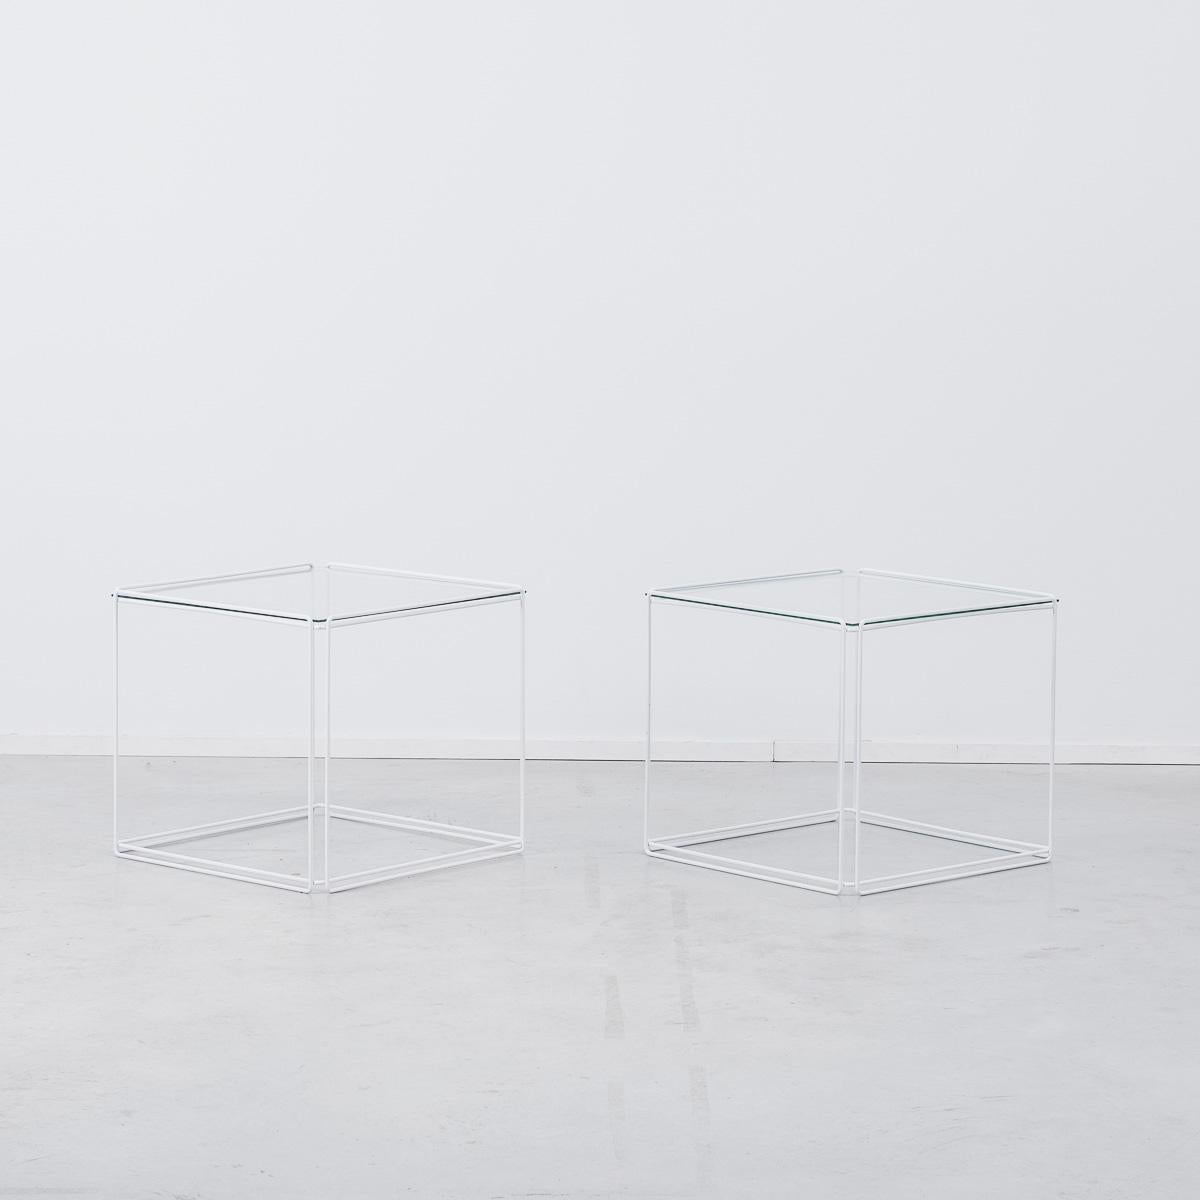 A set of Minimalist side tables by French artist Max Sauze, circa 1968. Geometric and sculptural, the wire frames give these tables a transparent quality. Constructed with off white enameled steel and glass. Very good condition besides some light